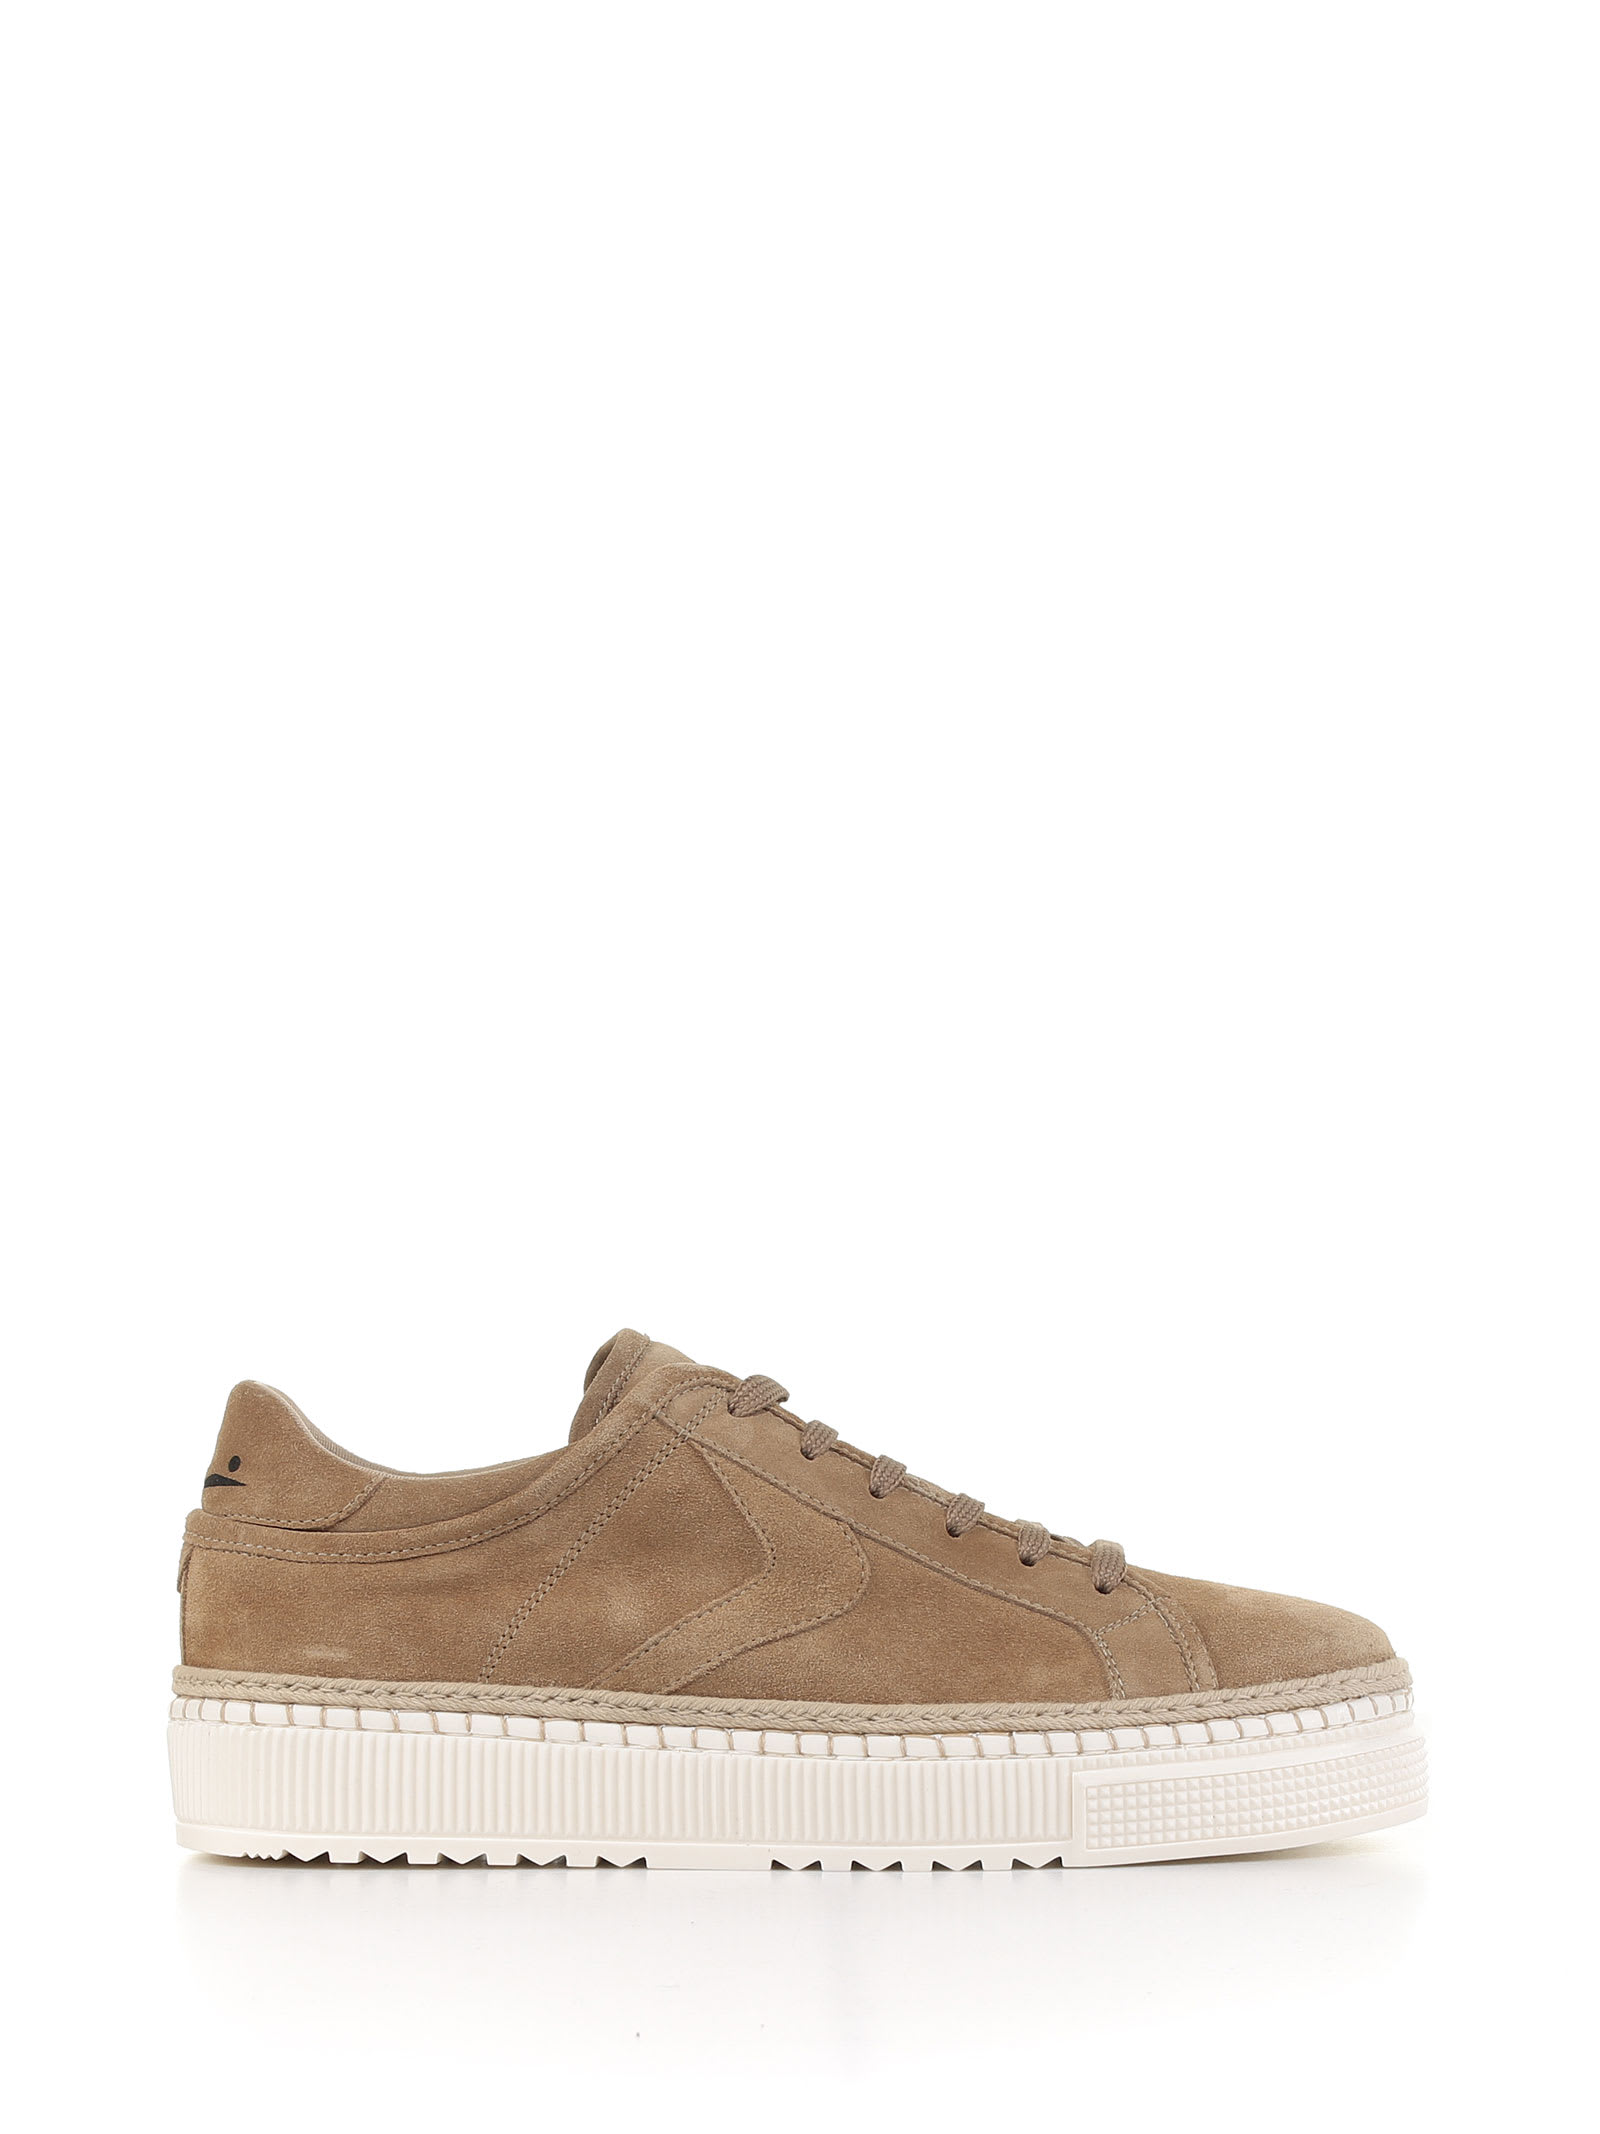 VOILE BLANCHE FIT SNEAKER IN SUEDE